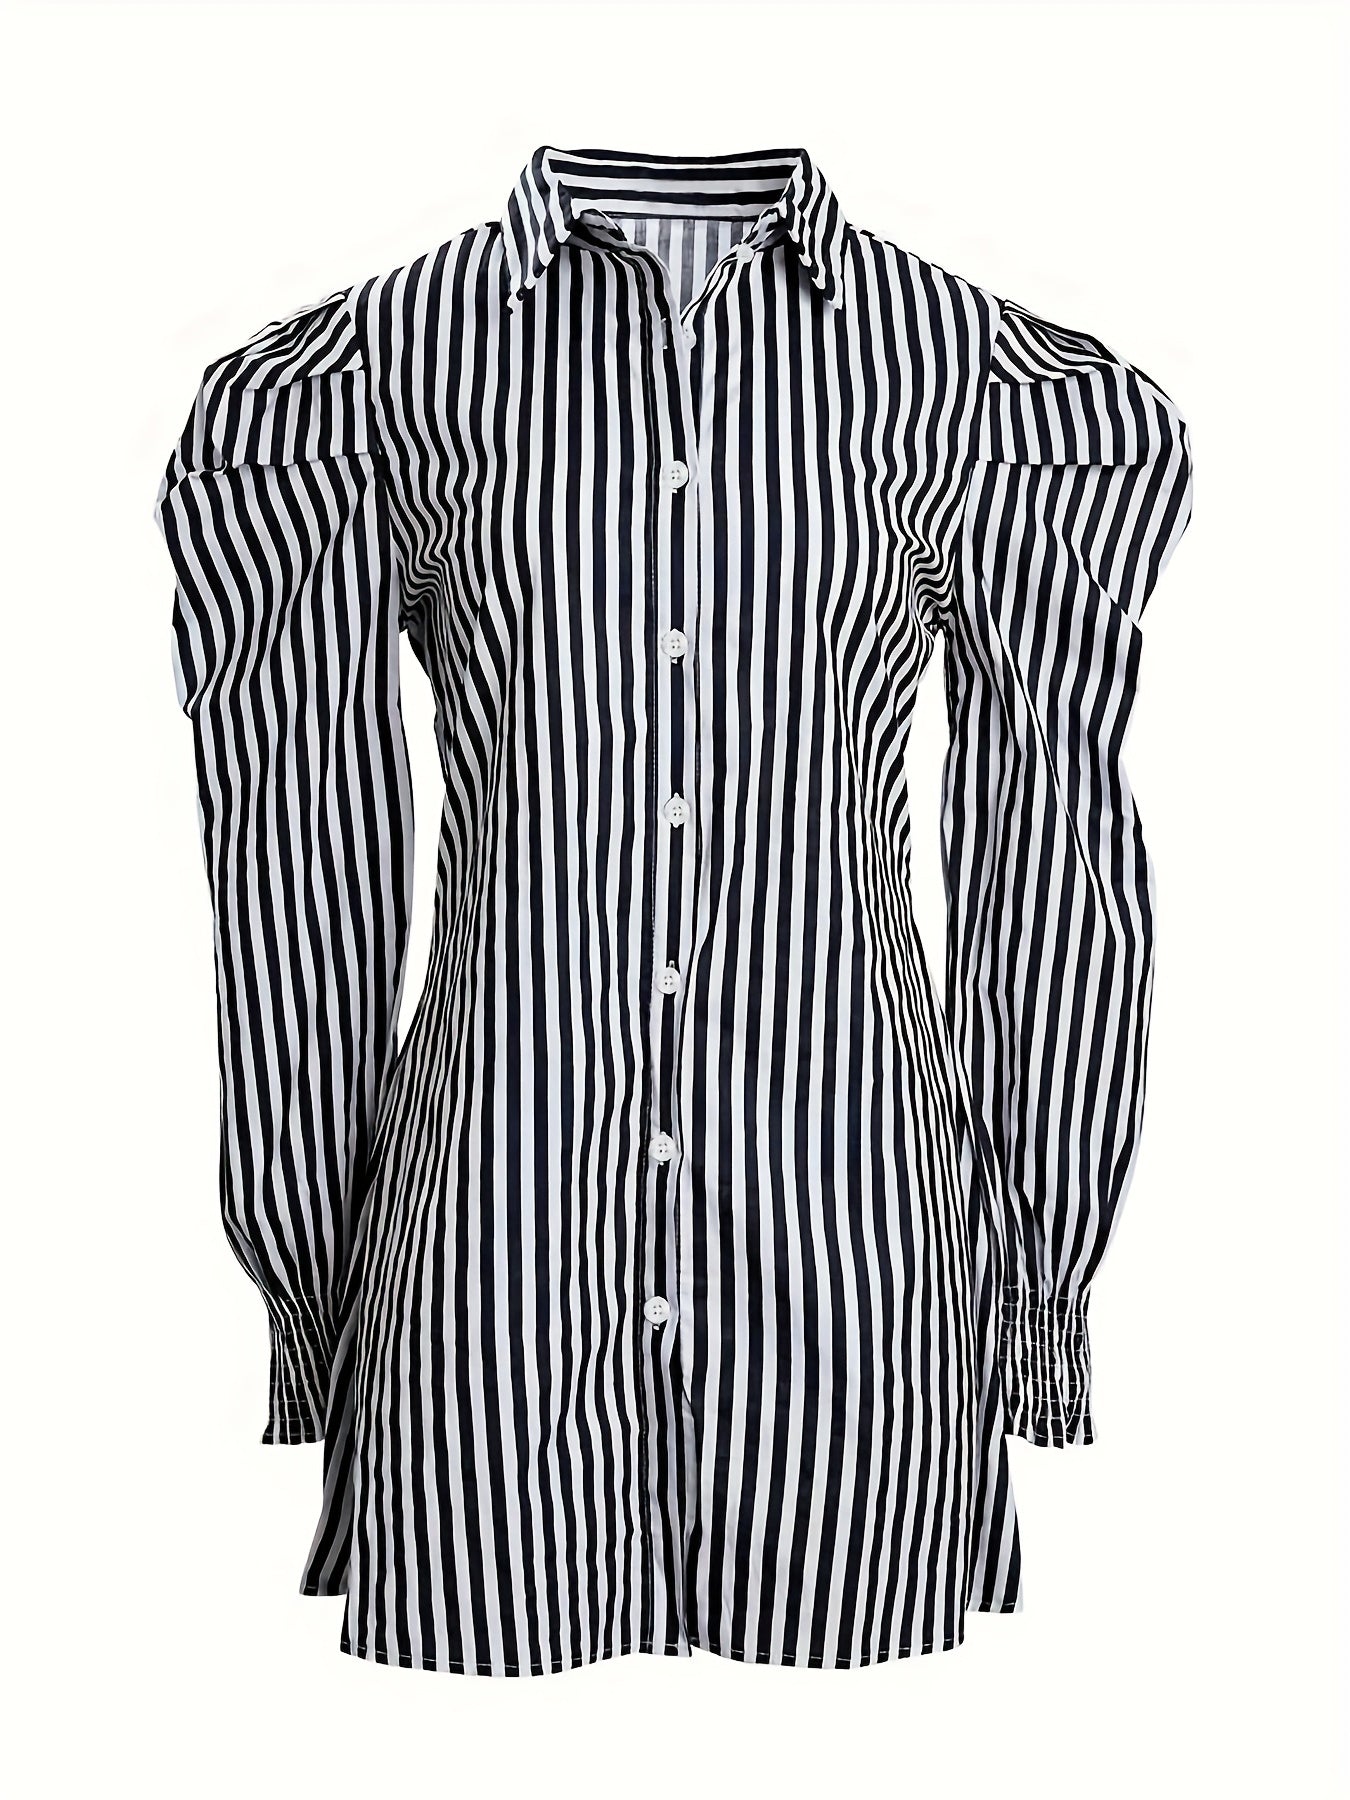 hoombox Striped Print Mini Dress, Casual Button Front Puff Long Sleeve Dress, Women's Clothing